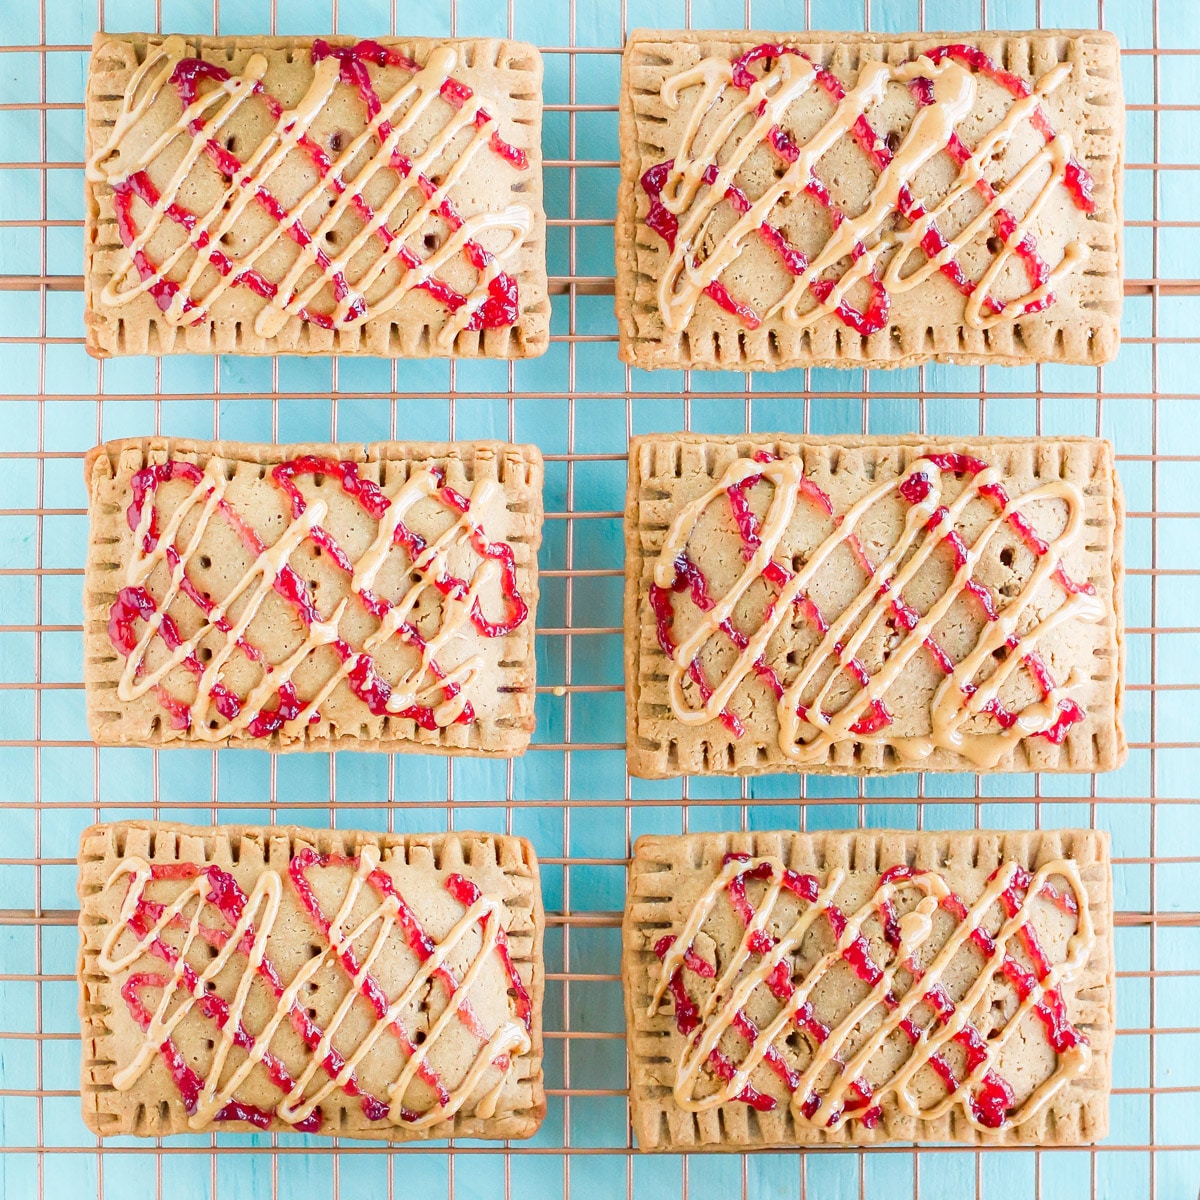 Homemade Peanut Butter and Jelly Toaster Pastries (gluten free, high protein, made with less sugar)